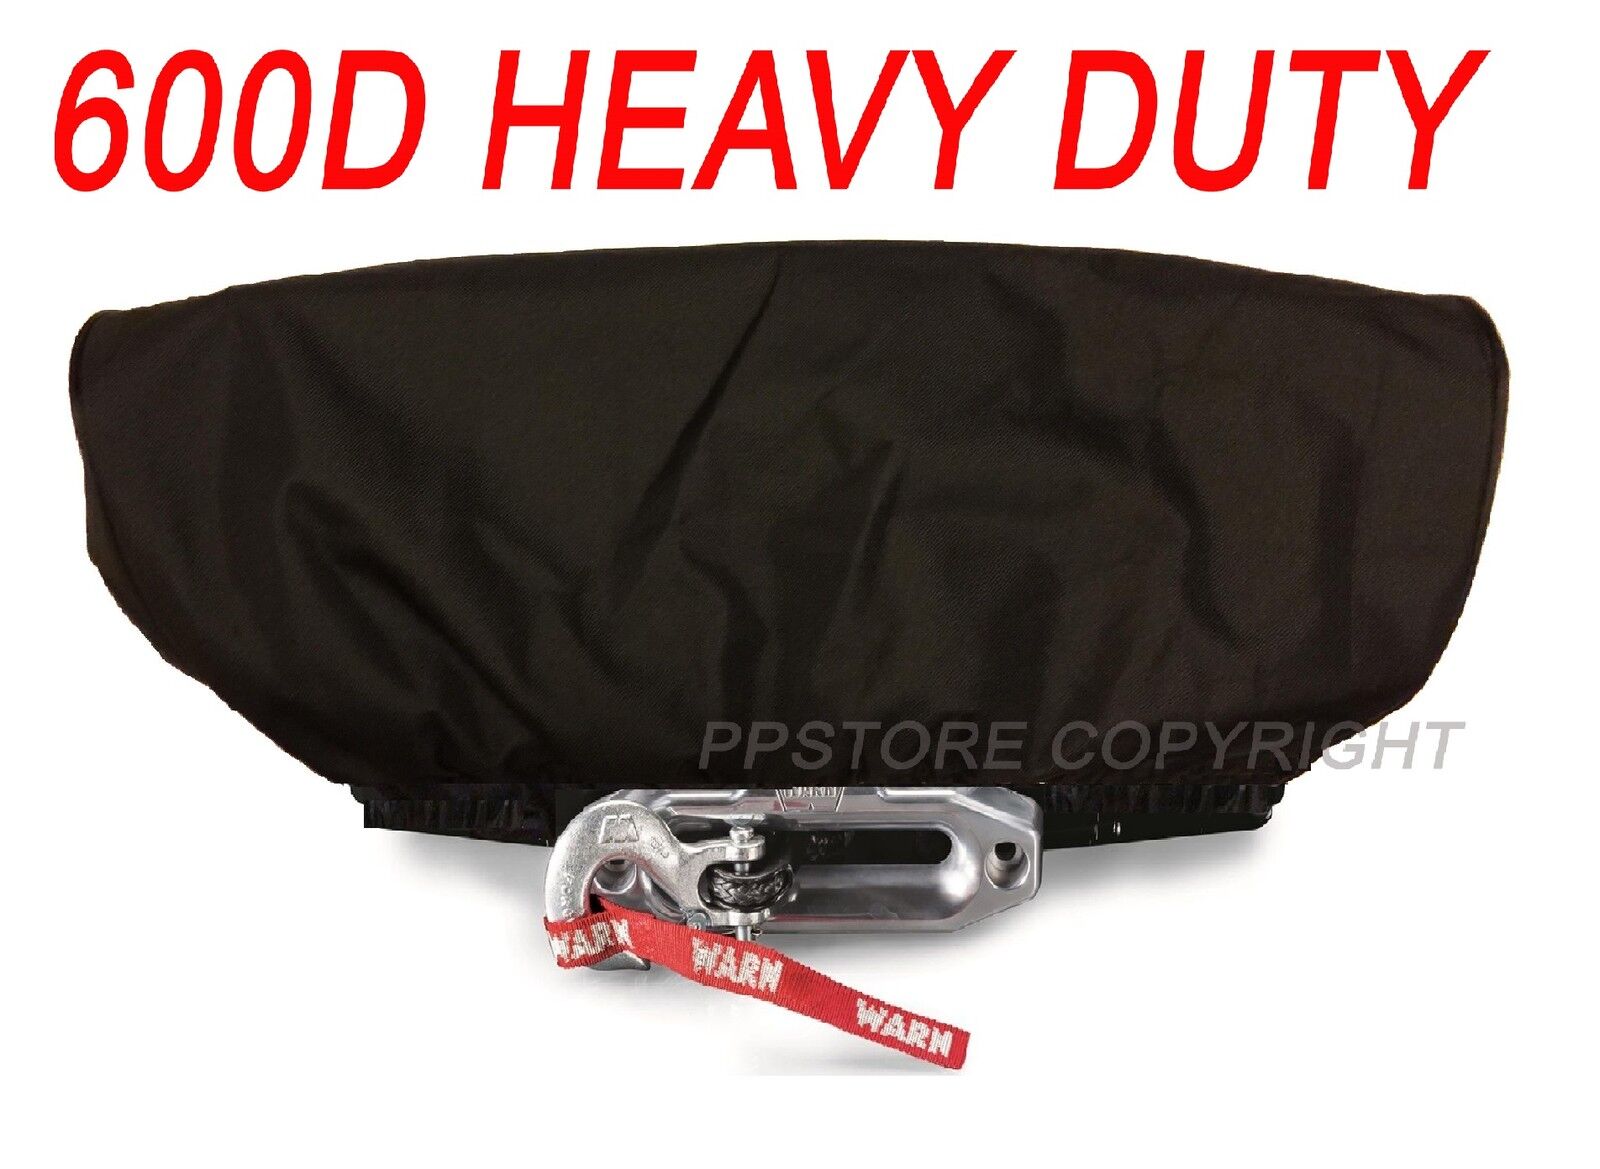 Waterproof Soft Winch Dust Cover Driver Recovery 8,000 - 17,500 lbs capacity BLK